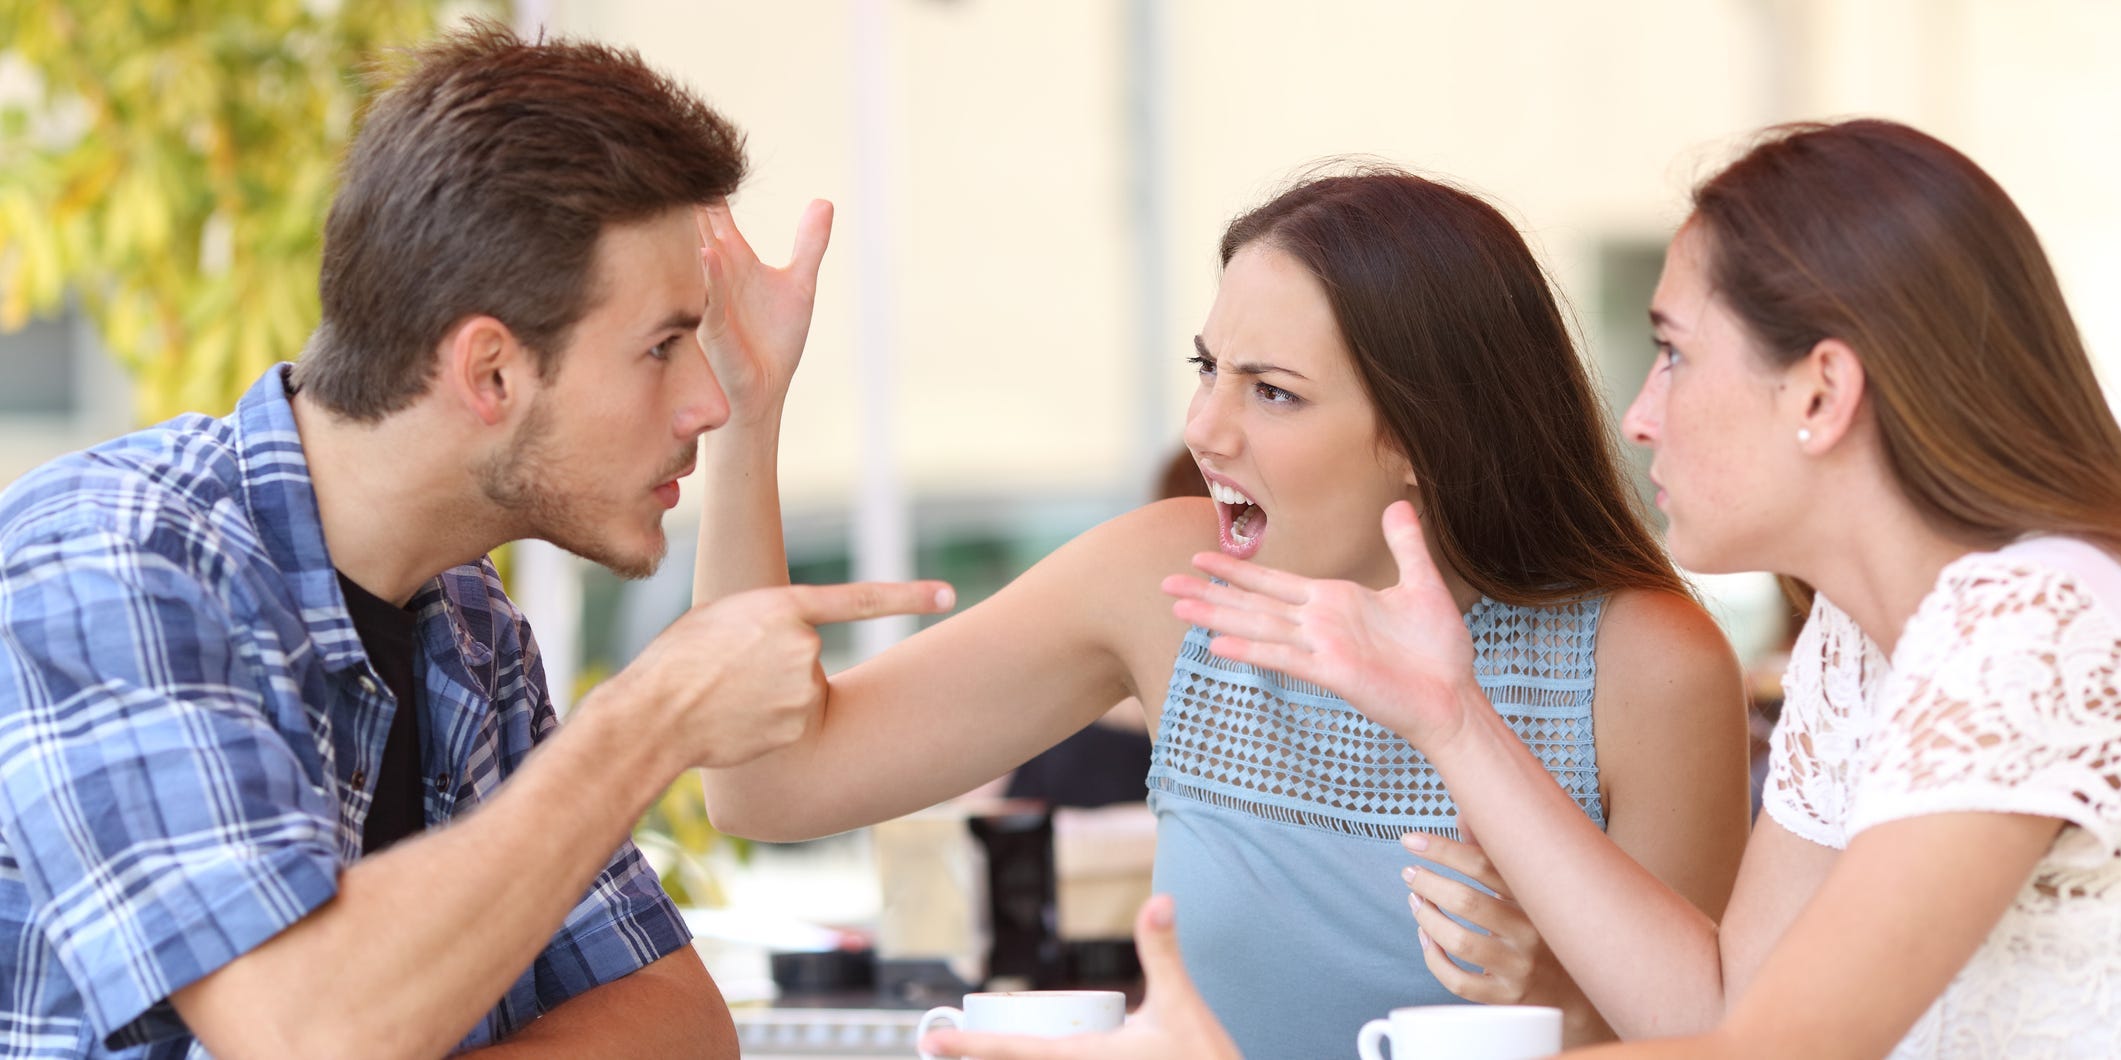 Two women and a man have a heated argument at a table.